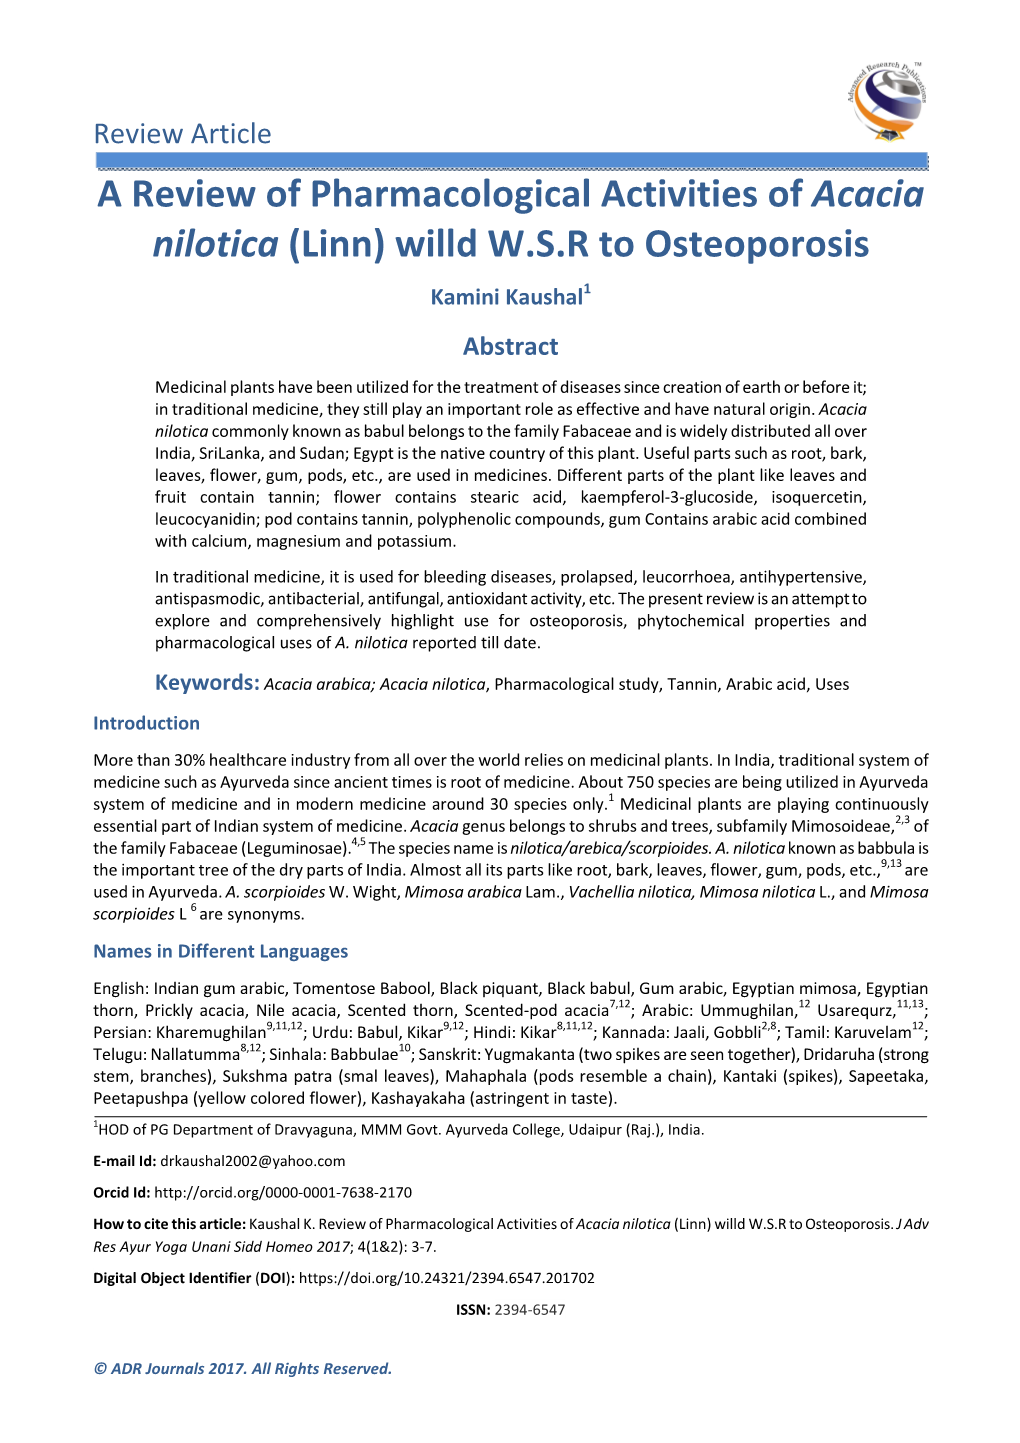 A Review of Pharmacological Activities of Acacia Nilotica (Linn) Willd W.S.R to Osteoporosis Kamini Kaushal 1 Abstract